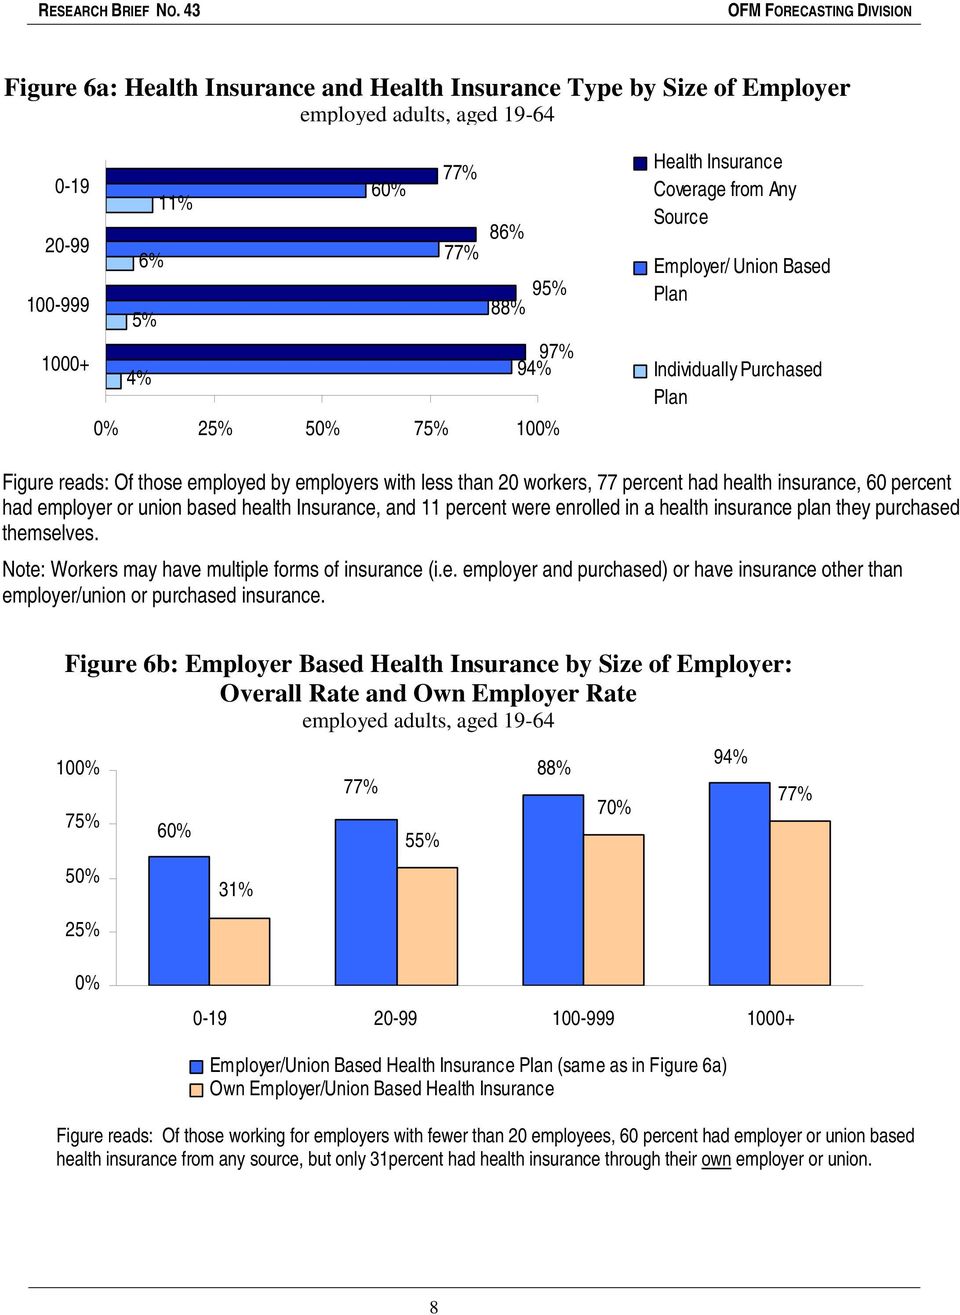 based health Insurance, and 11 percent were enrolled in a health insurance plan they purchased themselves. Note: Workers may have multiple forms of insurance (i.e. employer and purchased) or have insurance other than employer/union or purchased insurance.